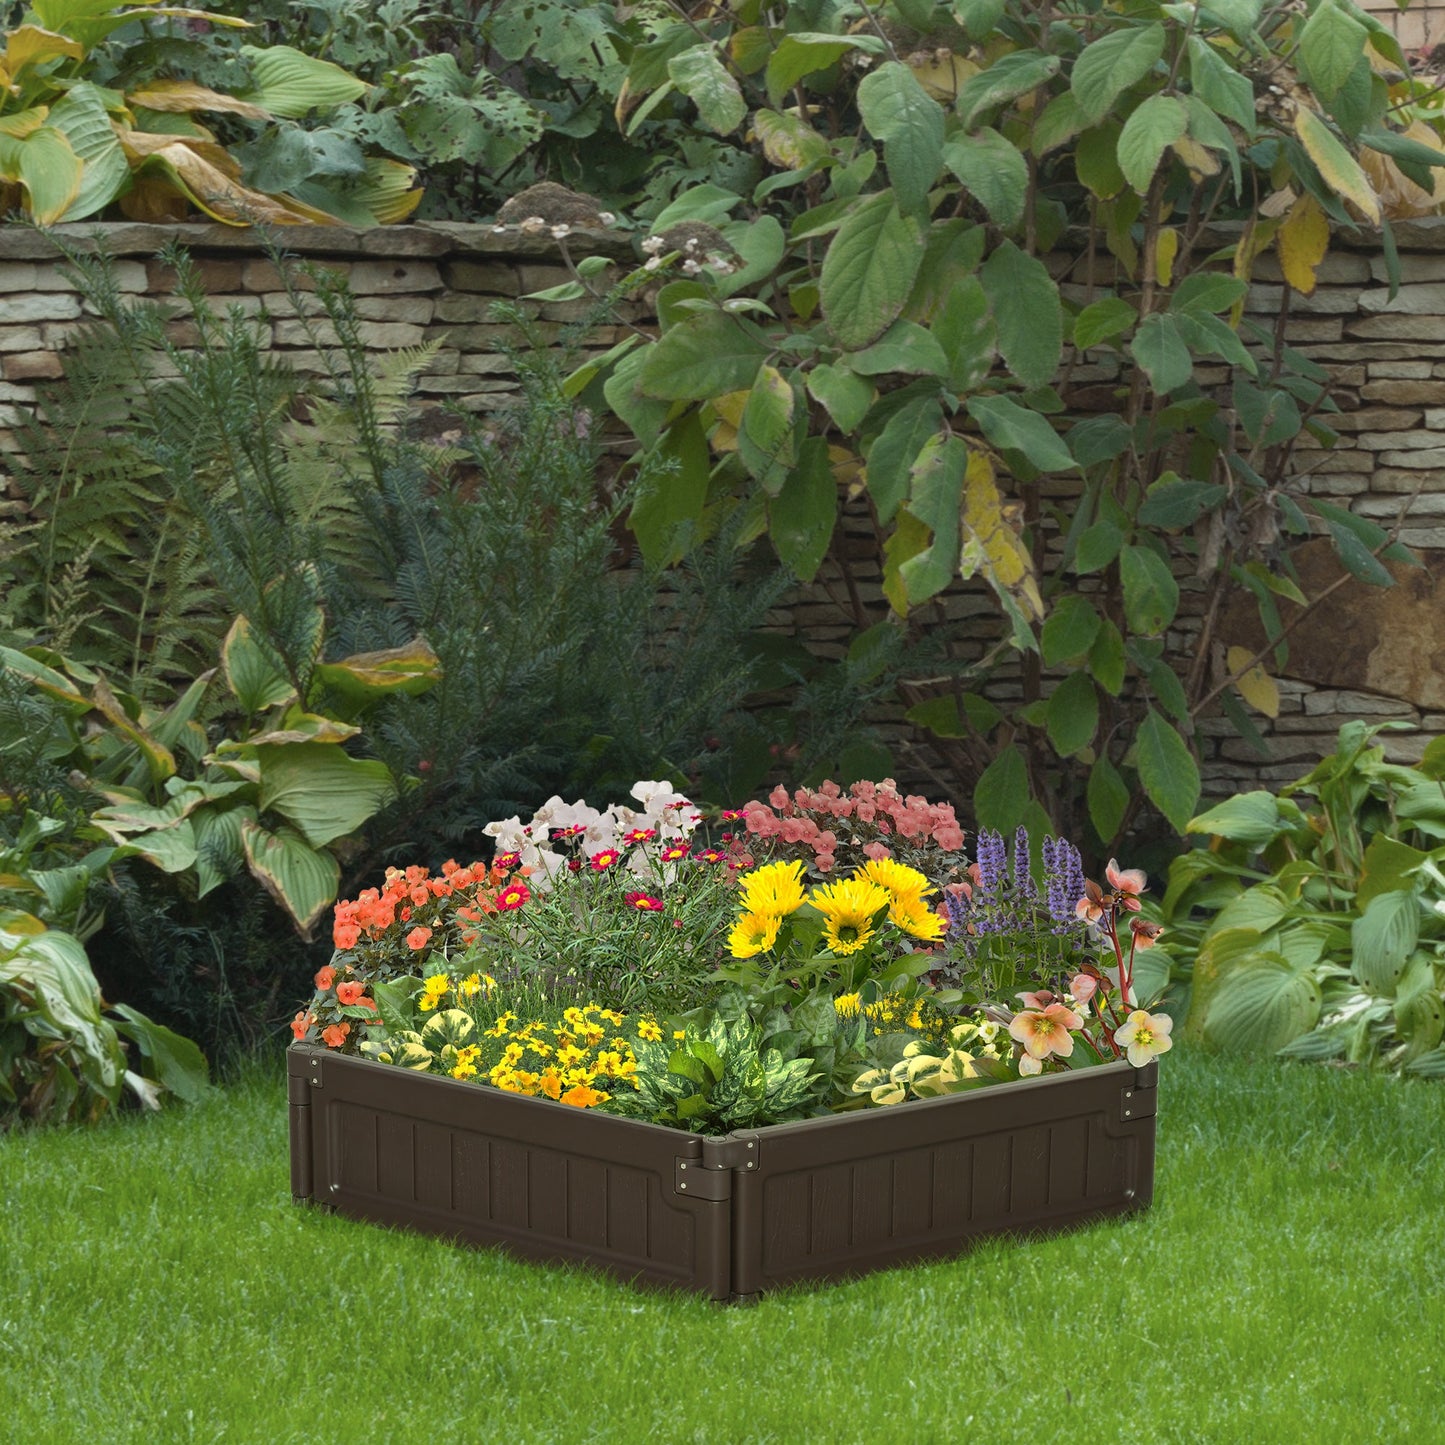 Outdoor and Garden-48" x 24" x 8" Raise Garden Bed Kit, Planter Box Above Ground for Flowers/Herb/Vegetables Outdoor Garden Backyard with Easy Assembly, Brown - Outdoor Style Company